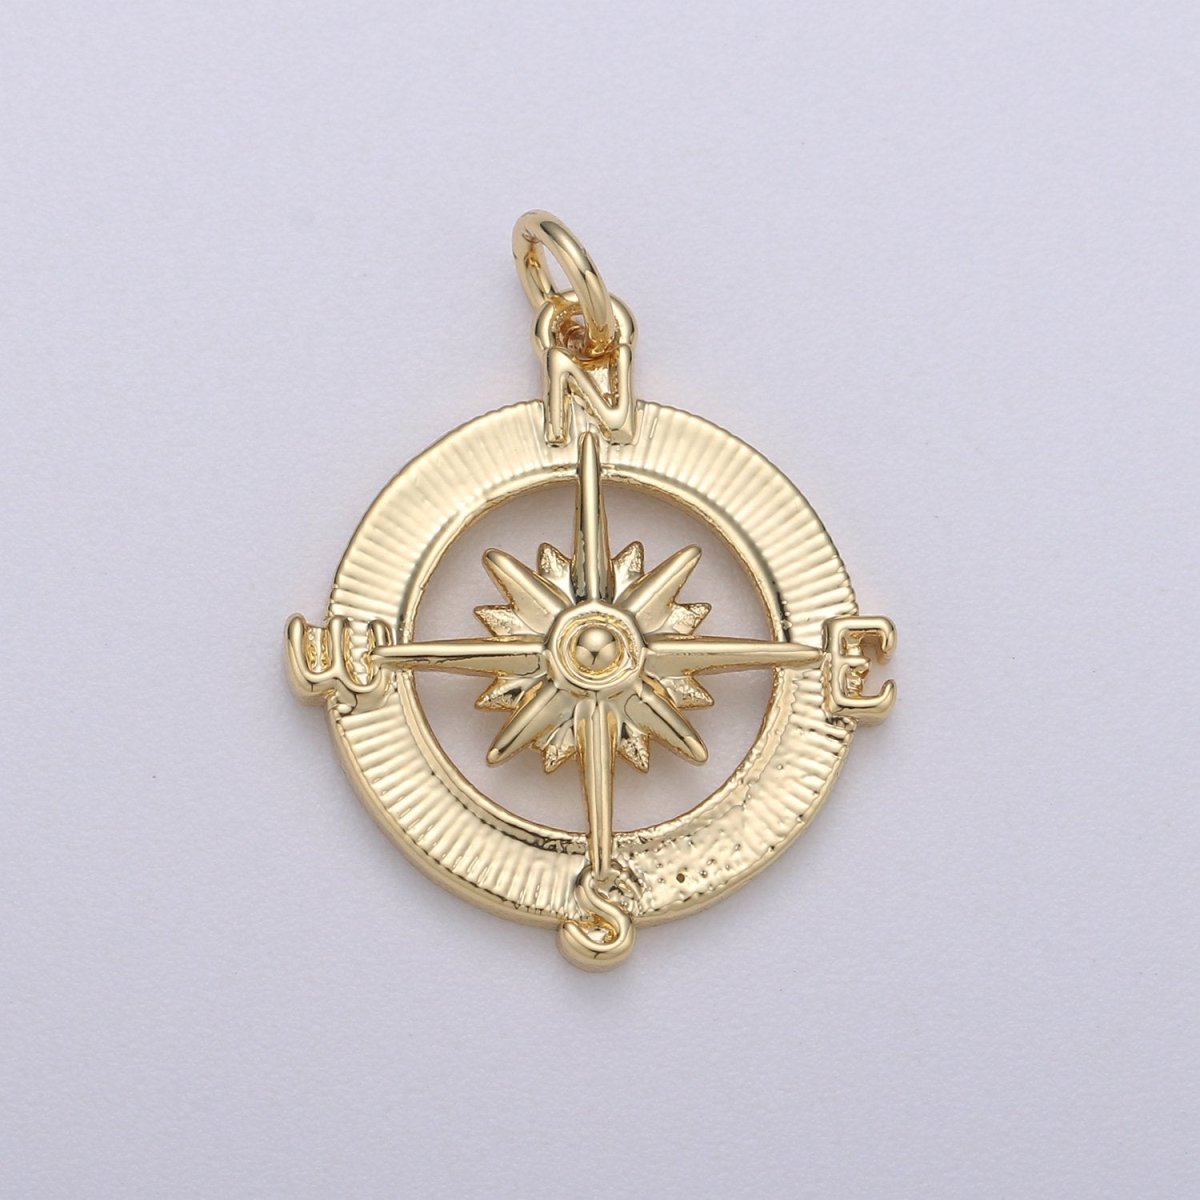 Finding your way - Solid Gold Compass Wind Rose Necklace 14k (585)